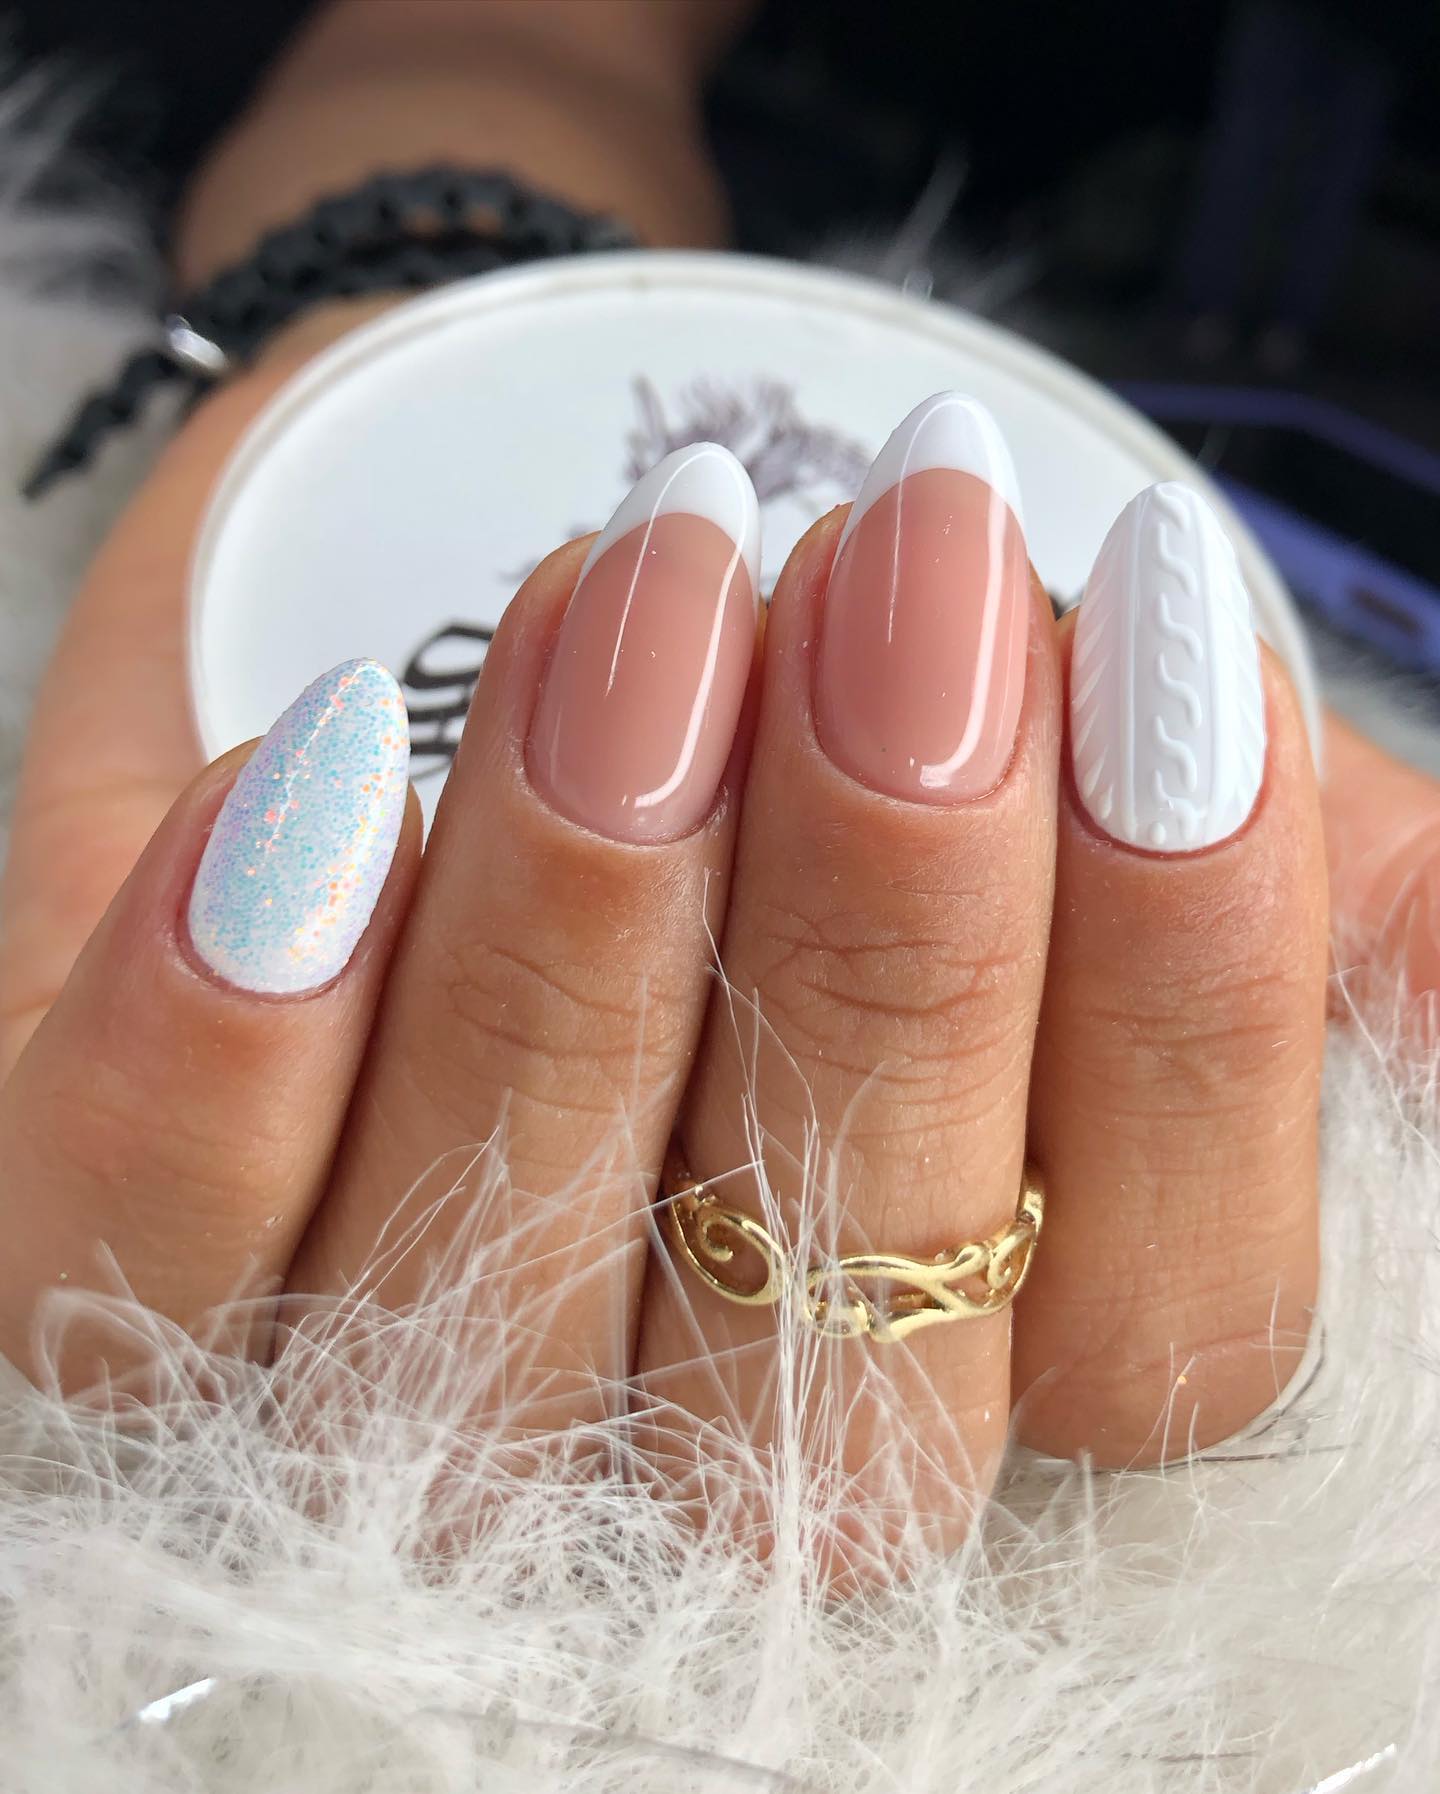 100+ Gorgeous Winter Nail Designs And Ideas images 99